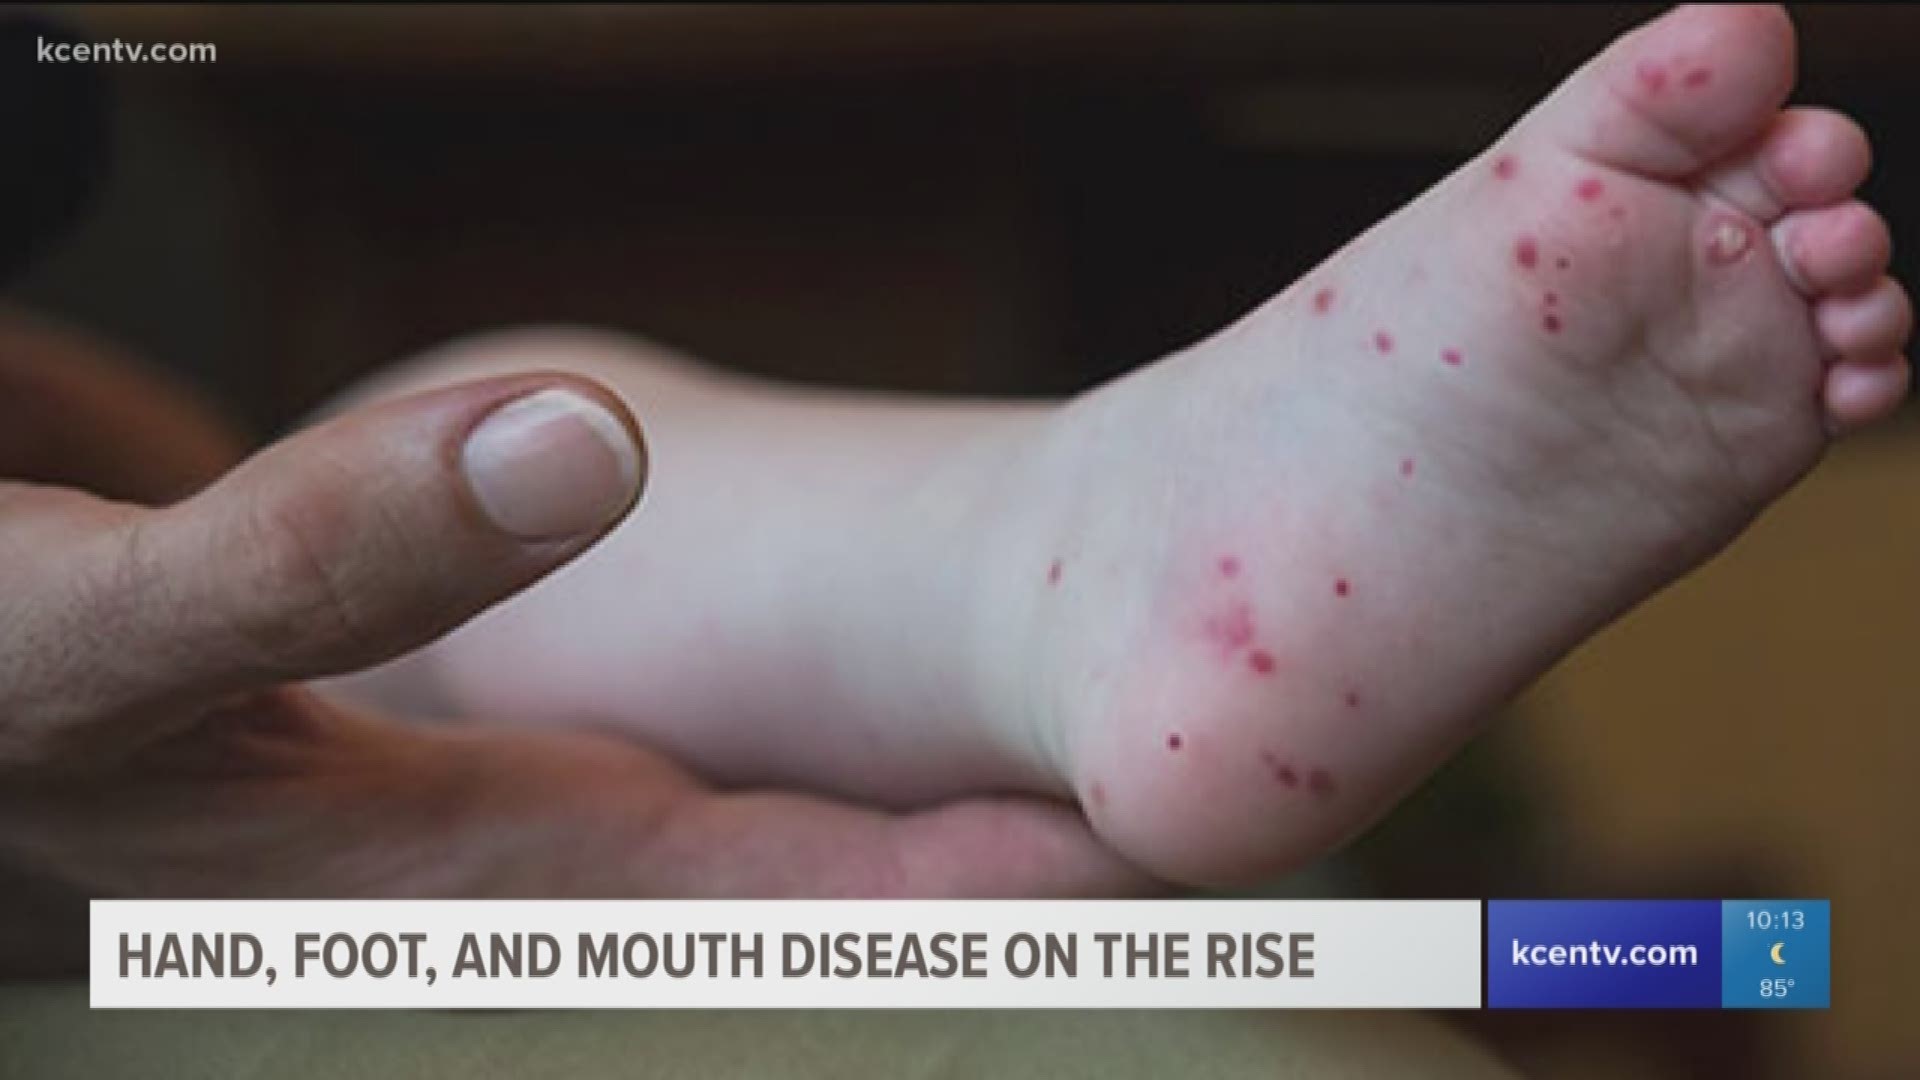 CDC has issued a warning of Hand, Foot and Mouth Disease cases on the rise in multiple states. We spoke with a doctor to see the impact in Central Texas. 